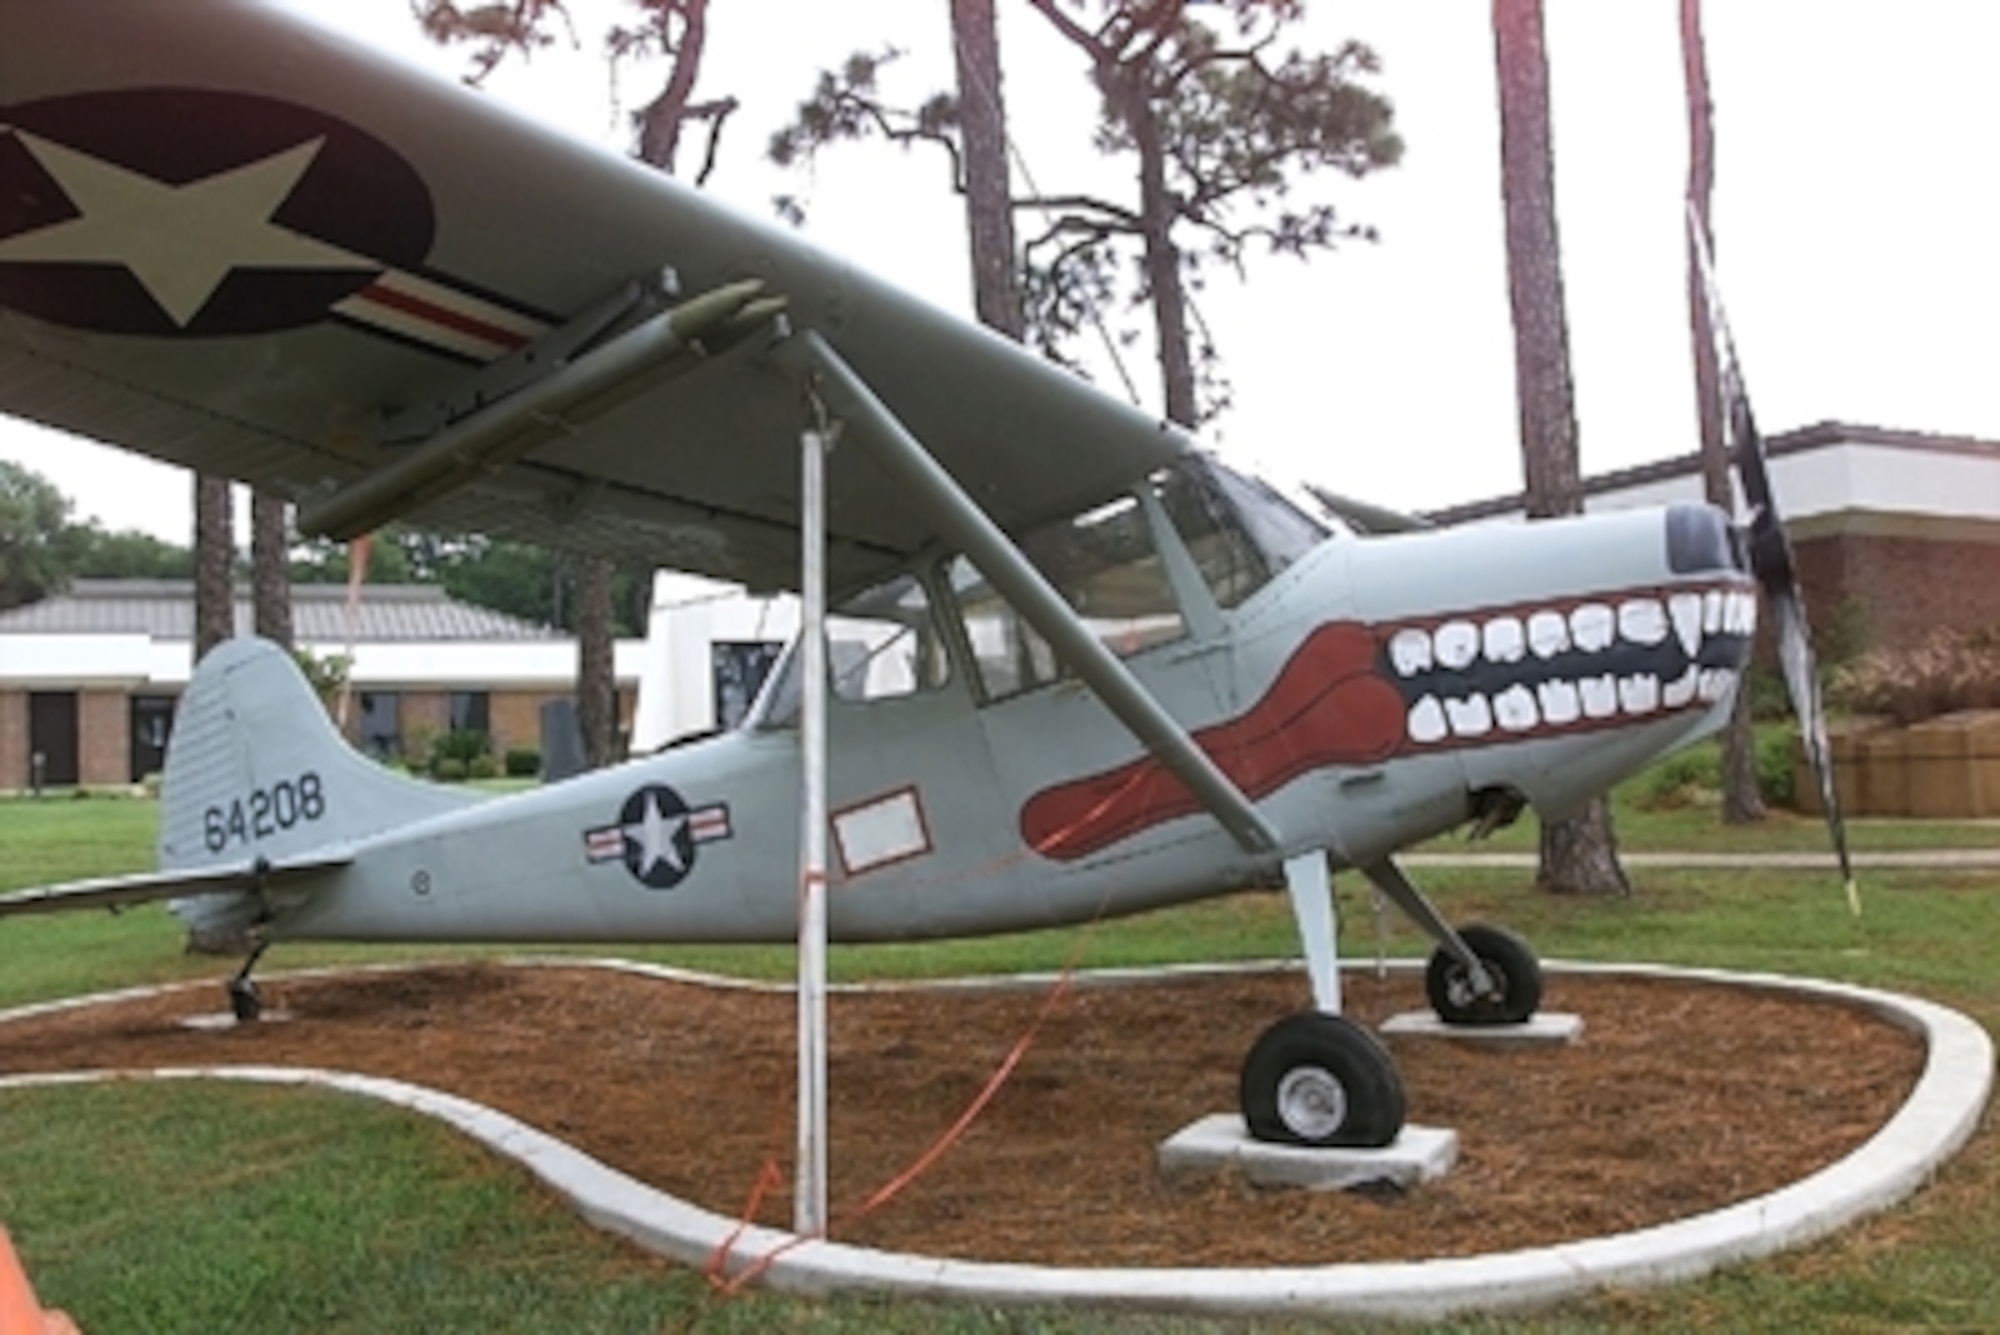 In 1950 Cessna won an Army design competition for a light, two-seat liaison and observation aircraft. They mated the wings and tail of one aircraft to a new fuselage with a large windowed "glasshouse" cabin and a 213 horsepower engine. The Army bought this L-19 Bird Dog which served in the Korean and Vietnam Wars.